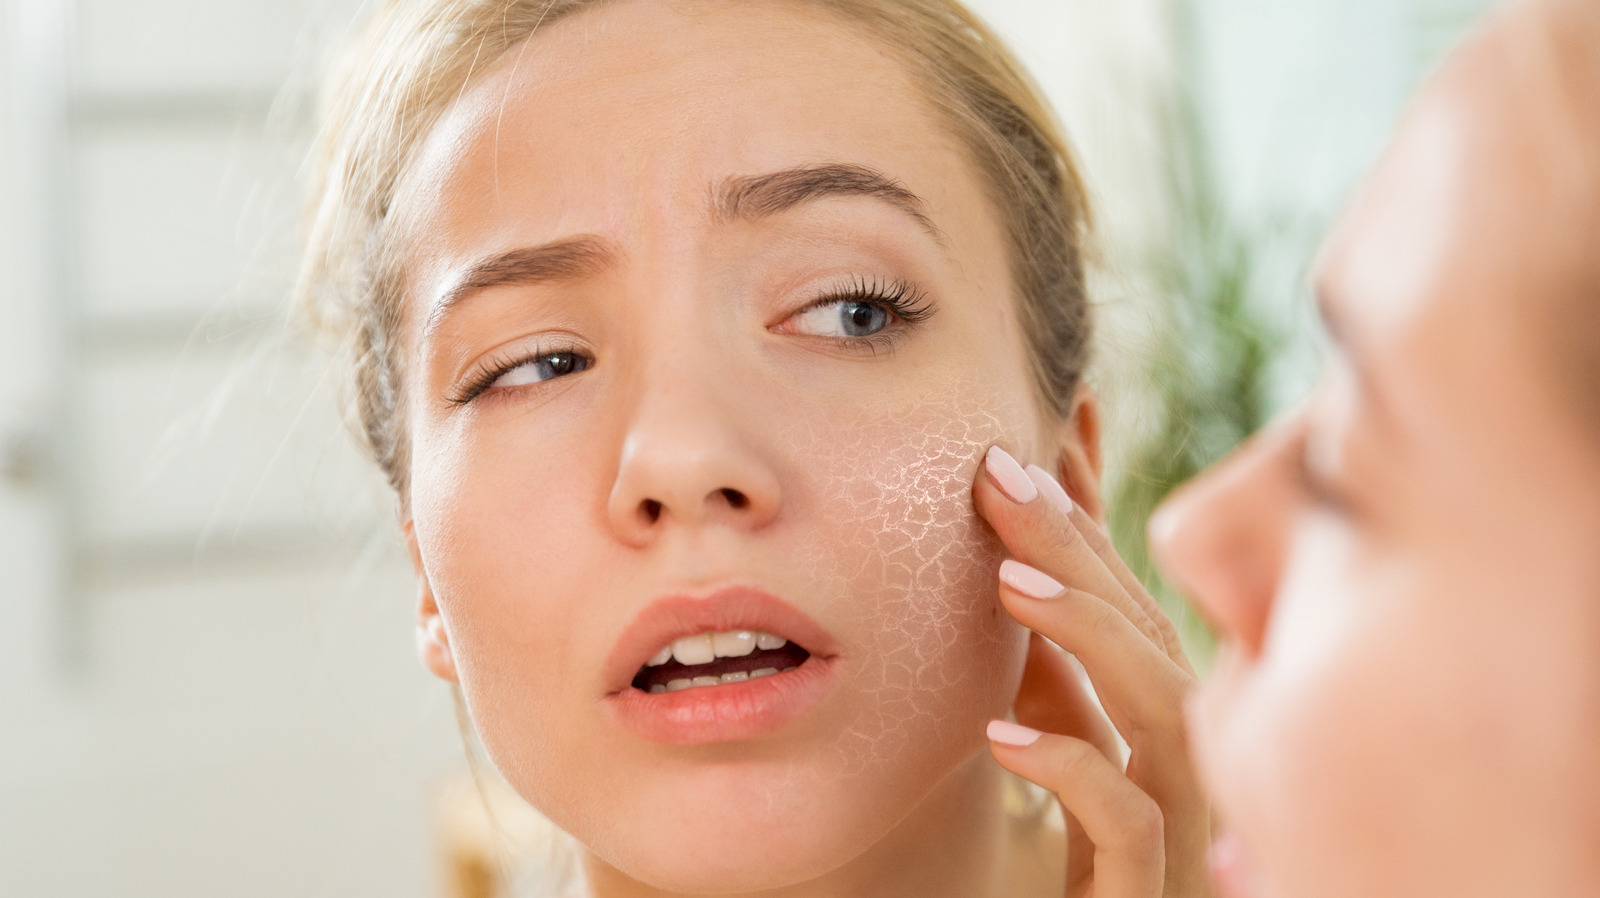 If You Have Dry Skin, You May Want To Run Through Your Skincare Routine Quicker